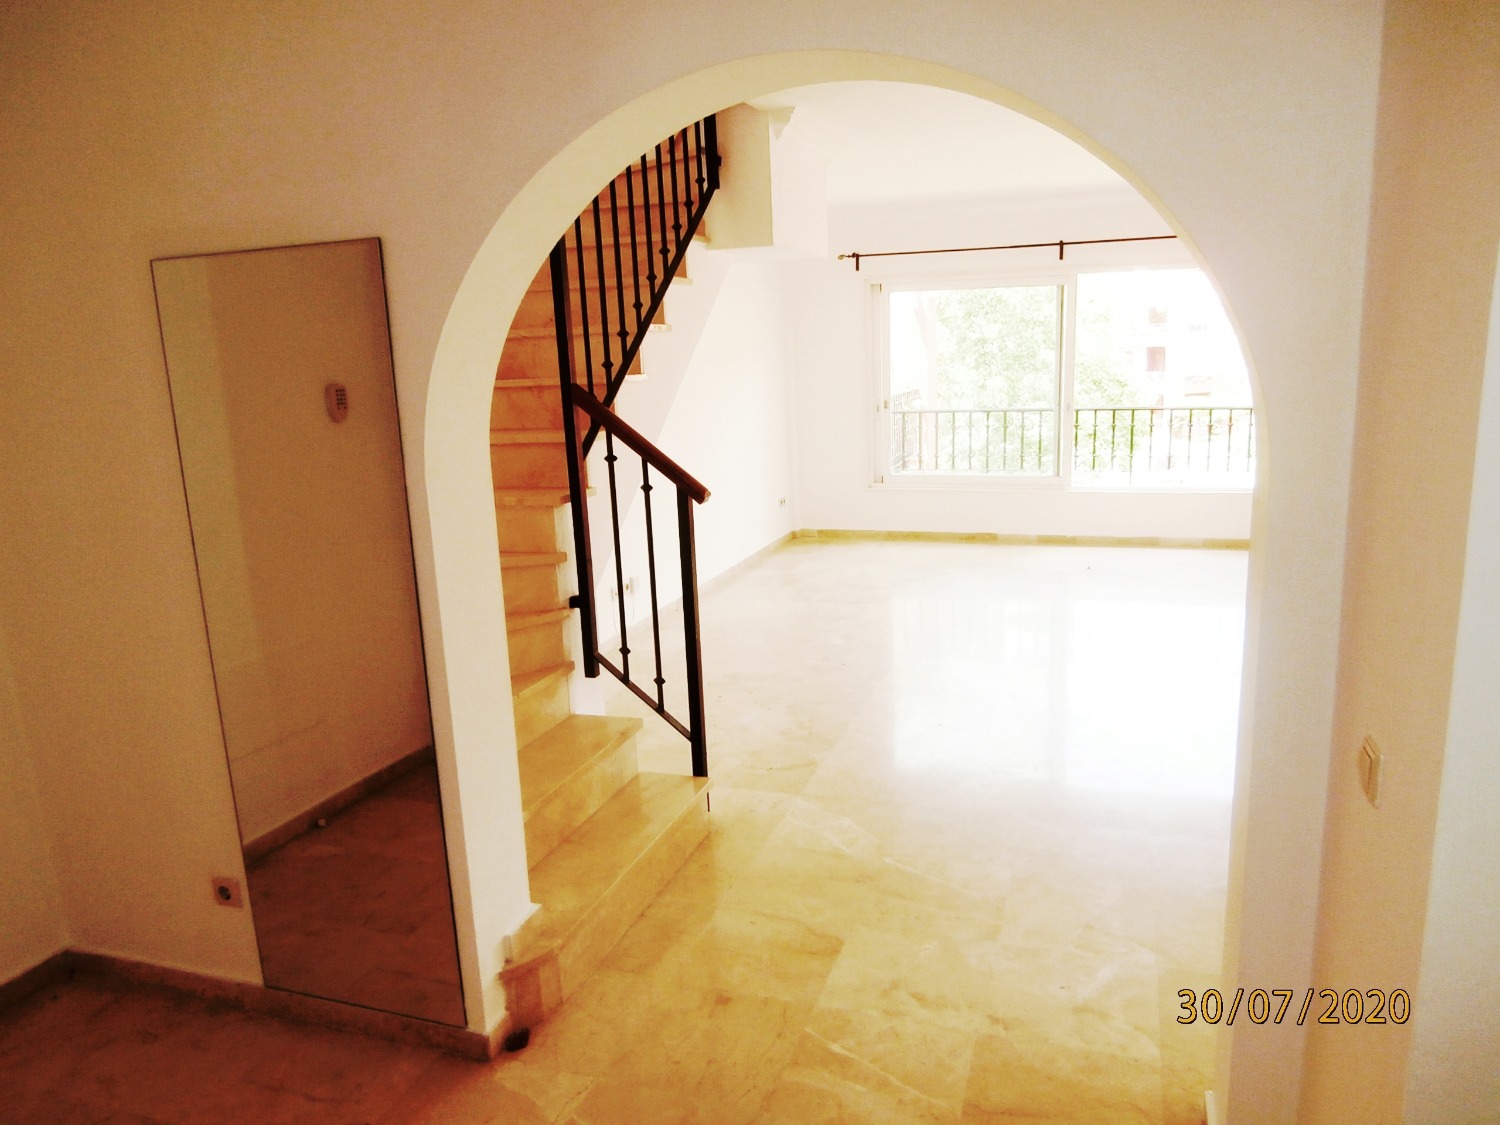 Excellent duplex penthouse very reduced price for quick a sale, located in exclusive gated community.